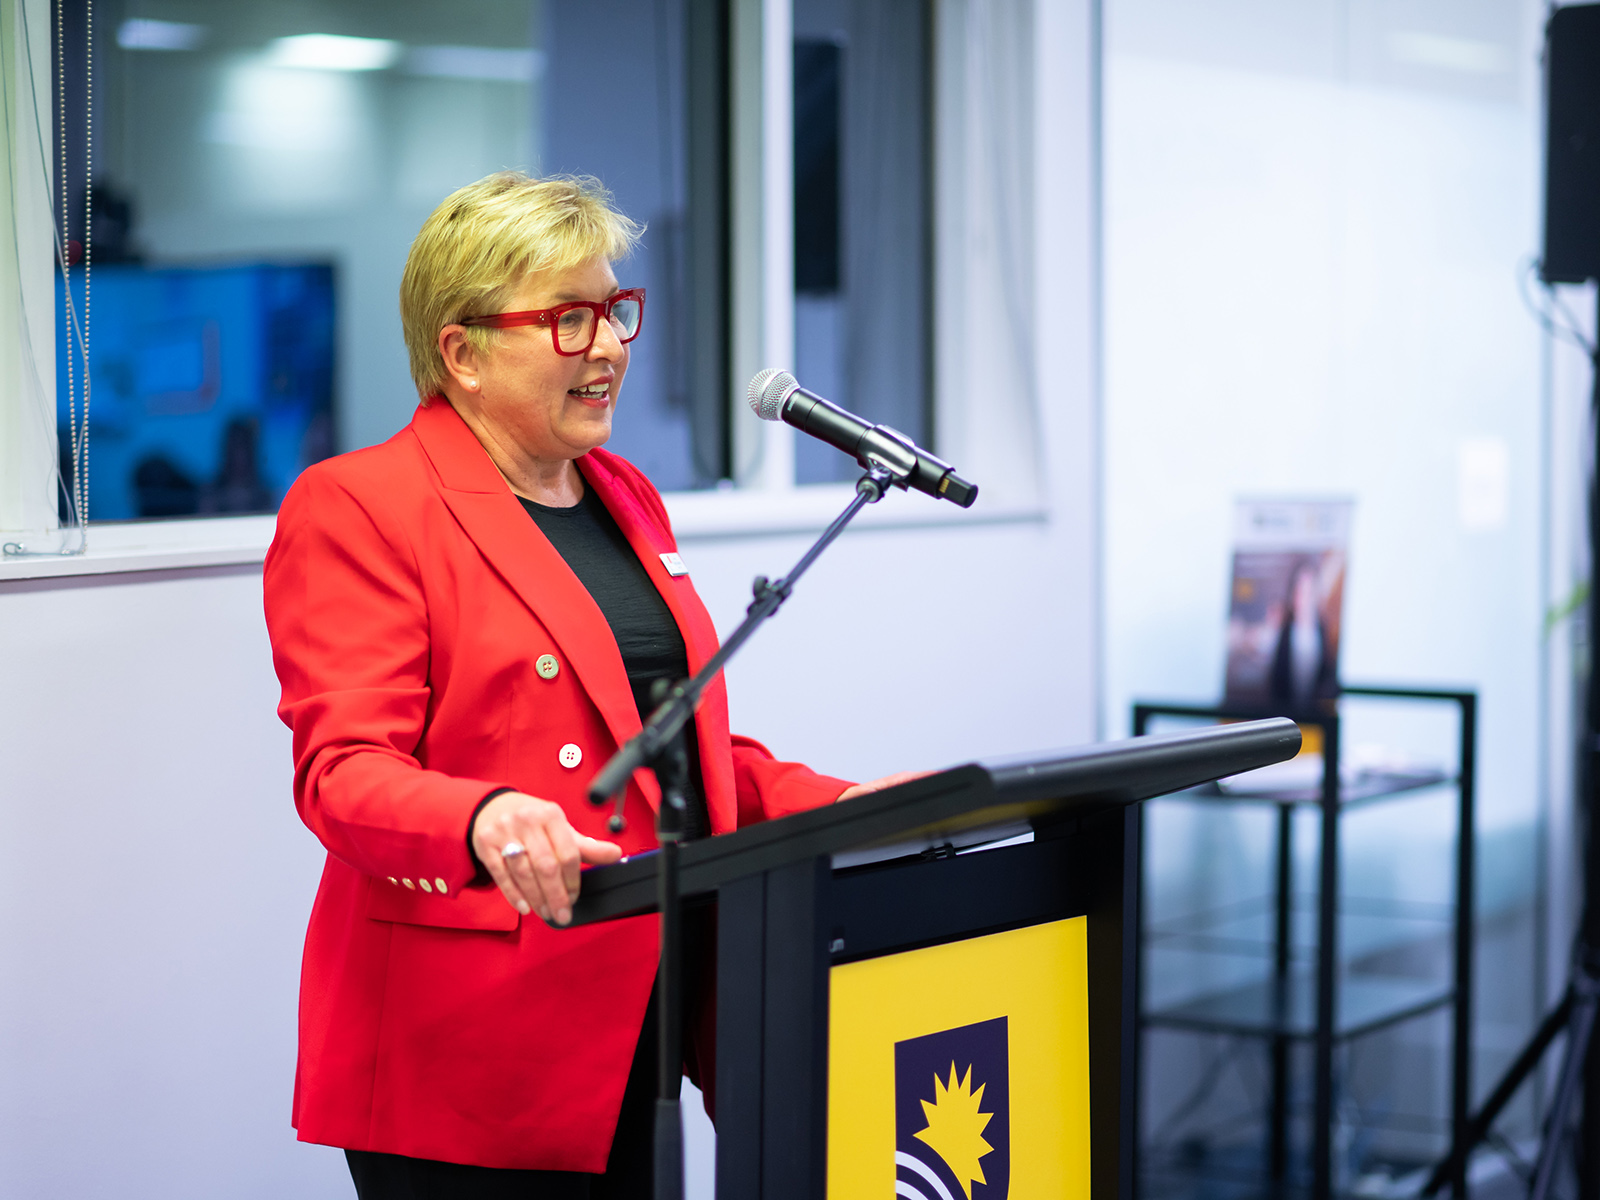 Professor Tania Leiman, Dean of Law at the Flinders Legal Centre 10th anniversary celebration.